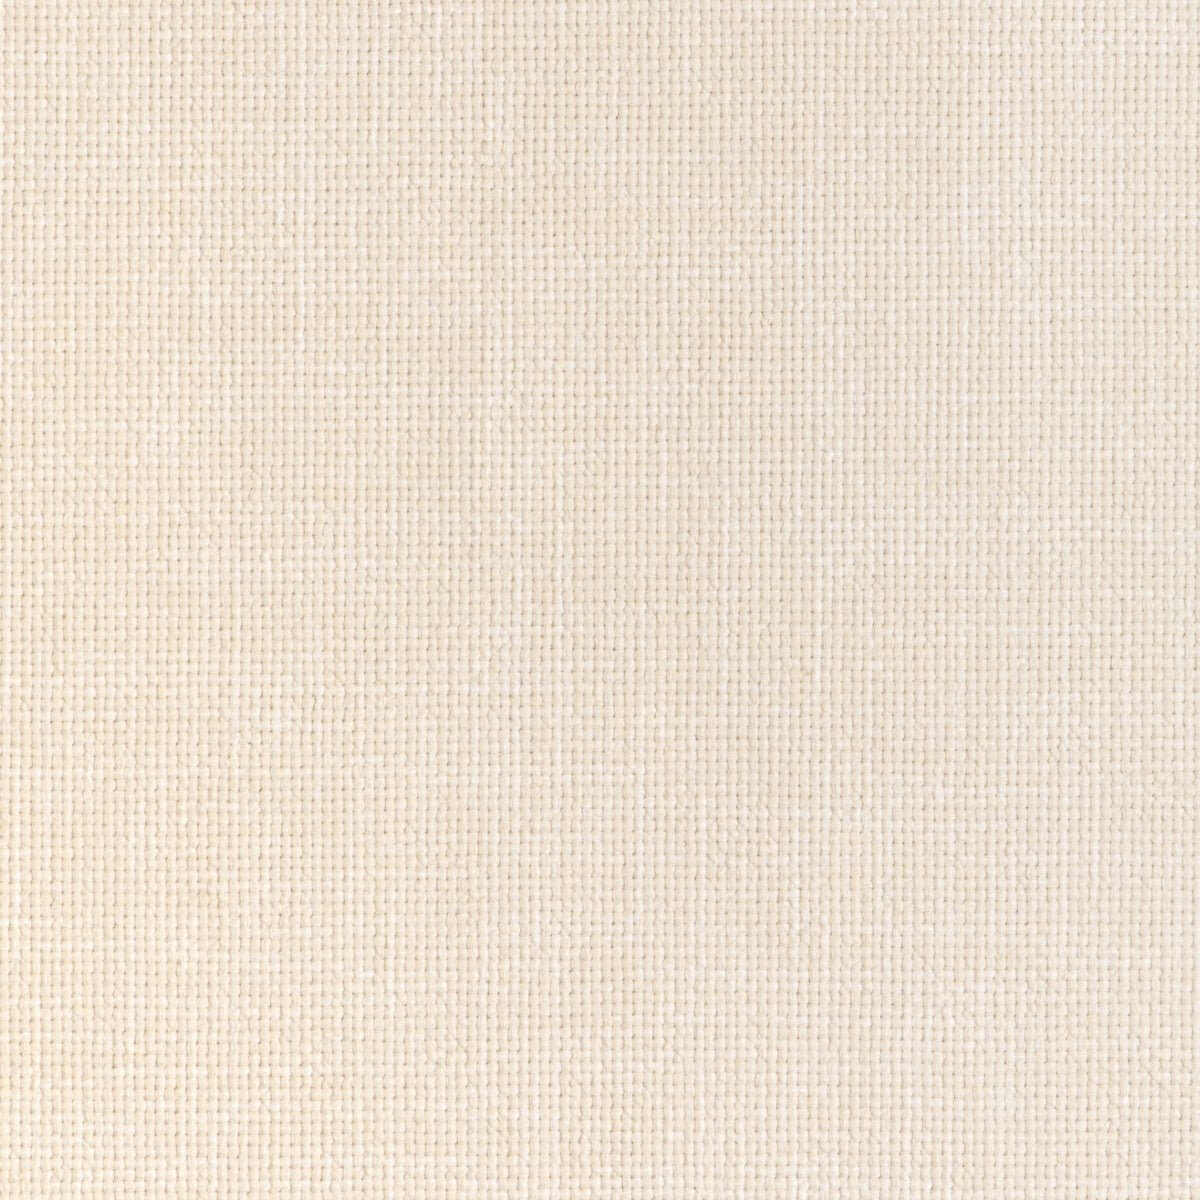 Les Canevas Plain fabric in bone color - pattern 8024114.1.0 - by Brunschwig &amp; Fils in the Les Ensembliers L&